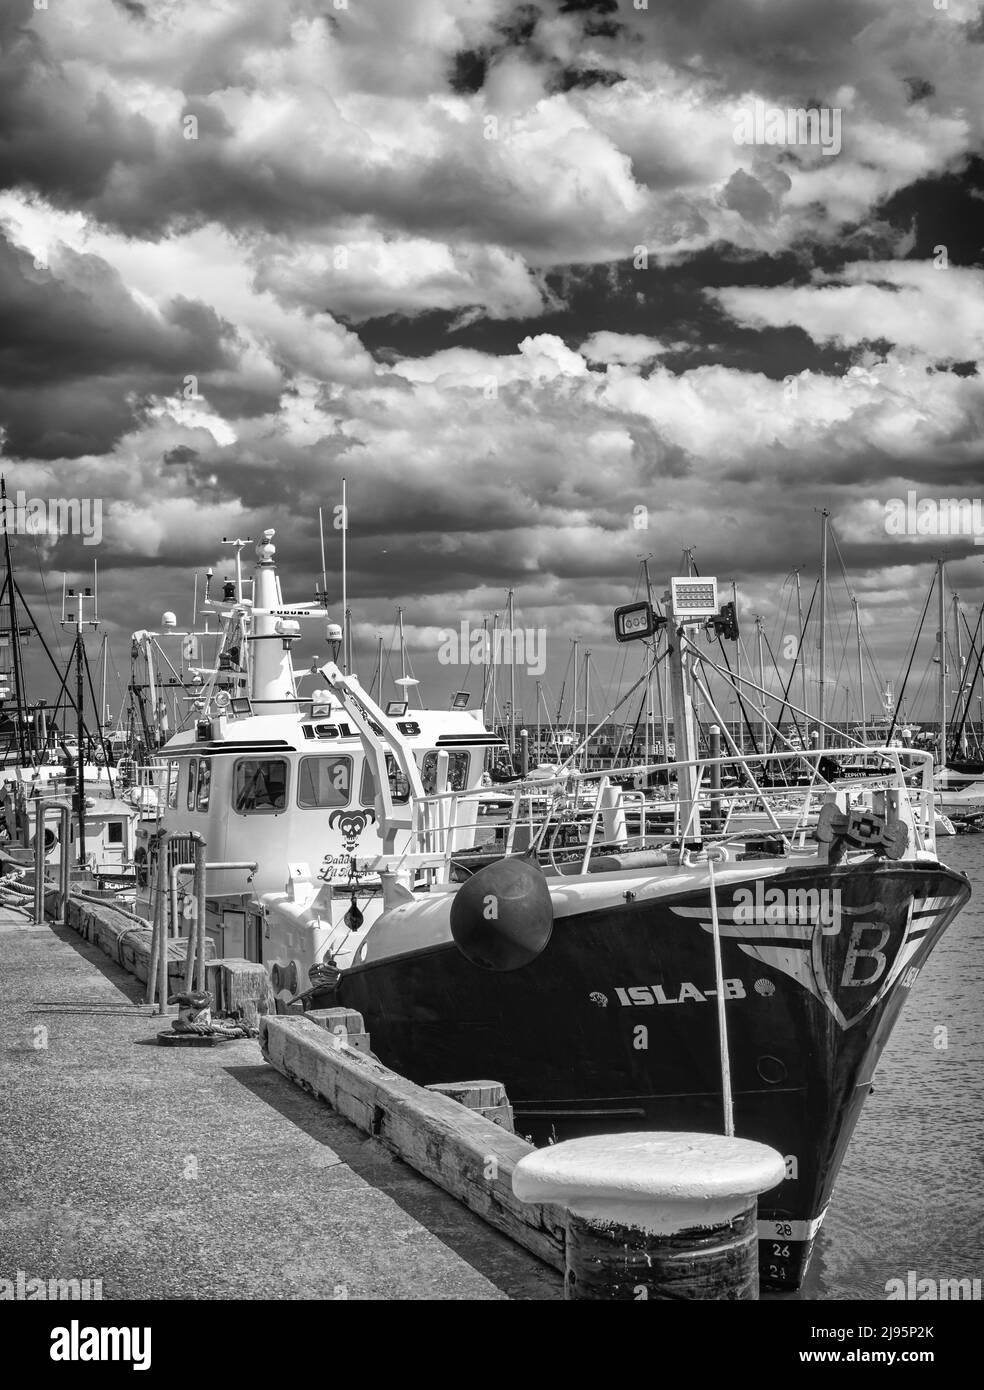 A trawler is moored at a quay. Ropes make the boat fast and the bridge bristles with antenae. A cloudy sky is above. Stock Photo